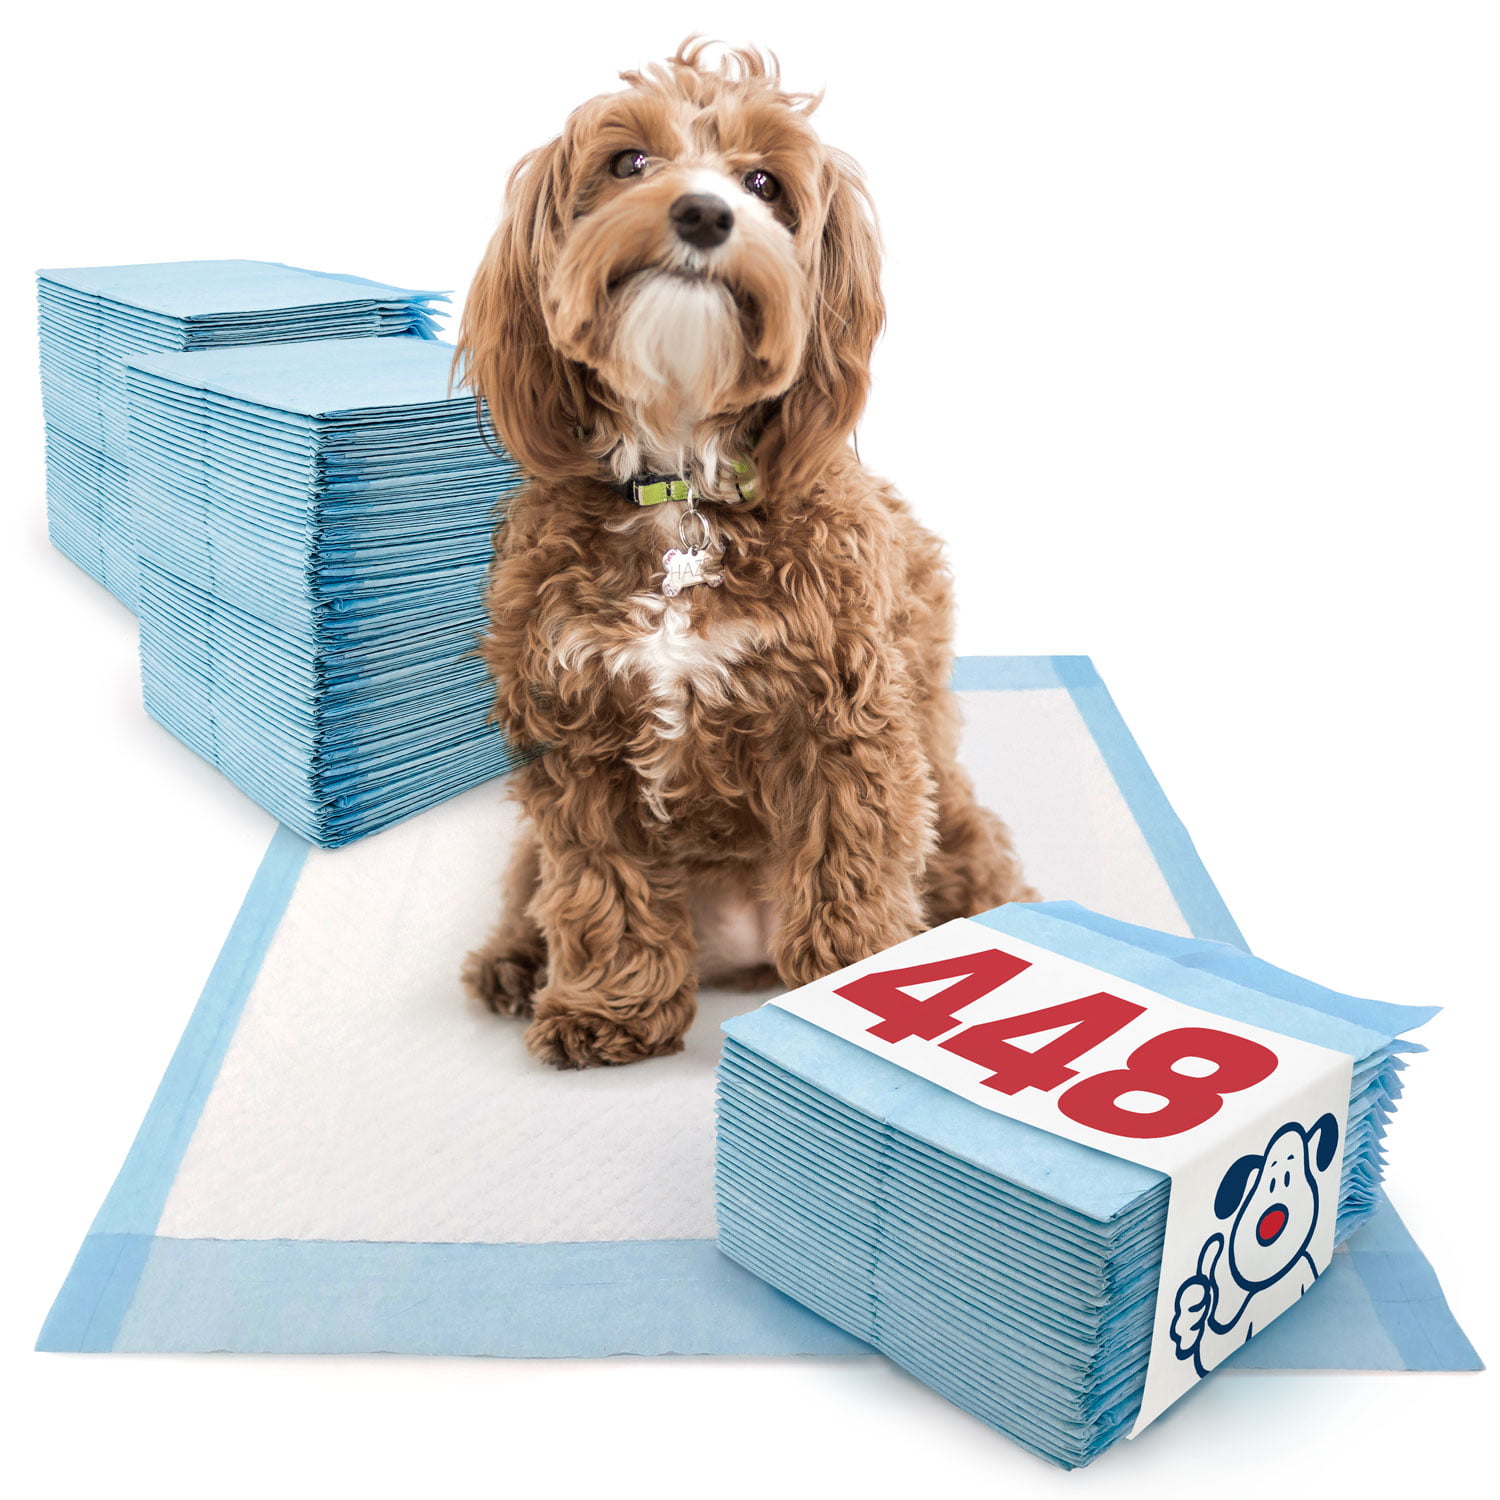 Cheap-Pads Low Cost Economy Puppy Training/Under Pads 17x24"-23x24"-23x36"